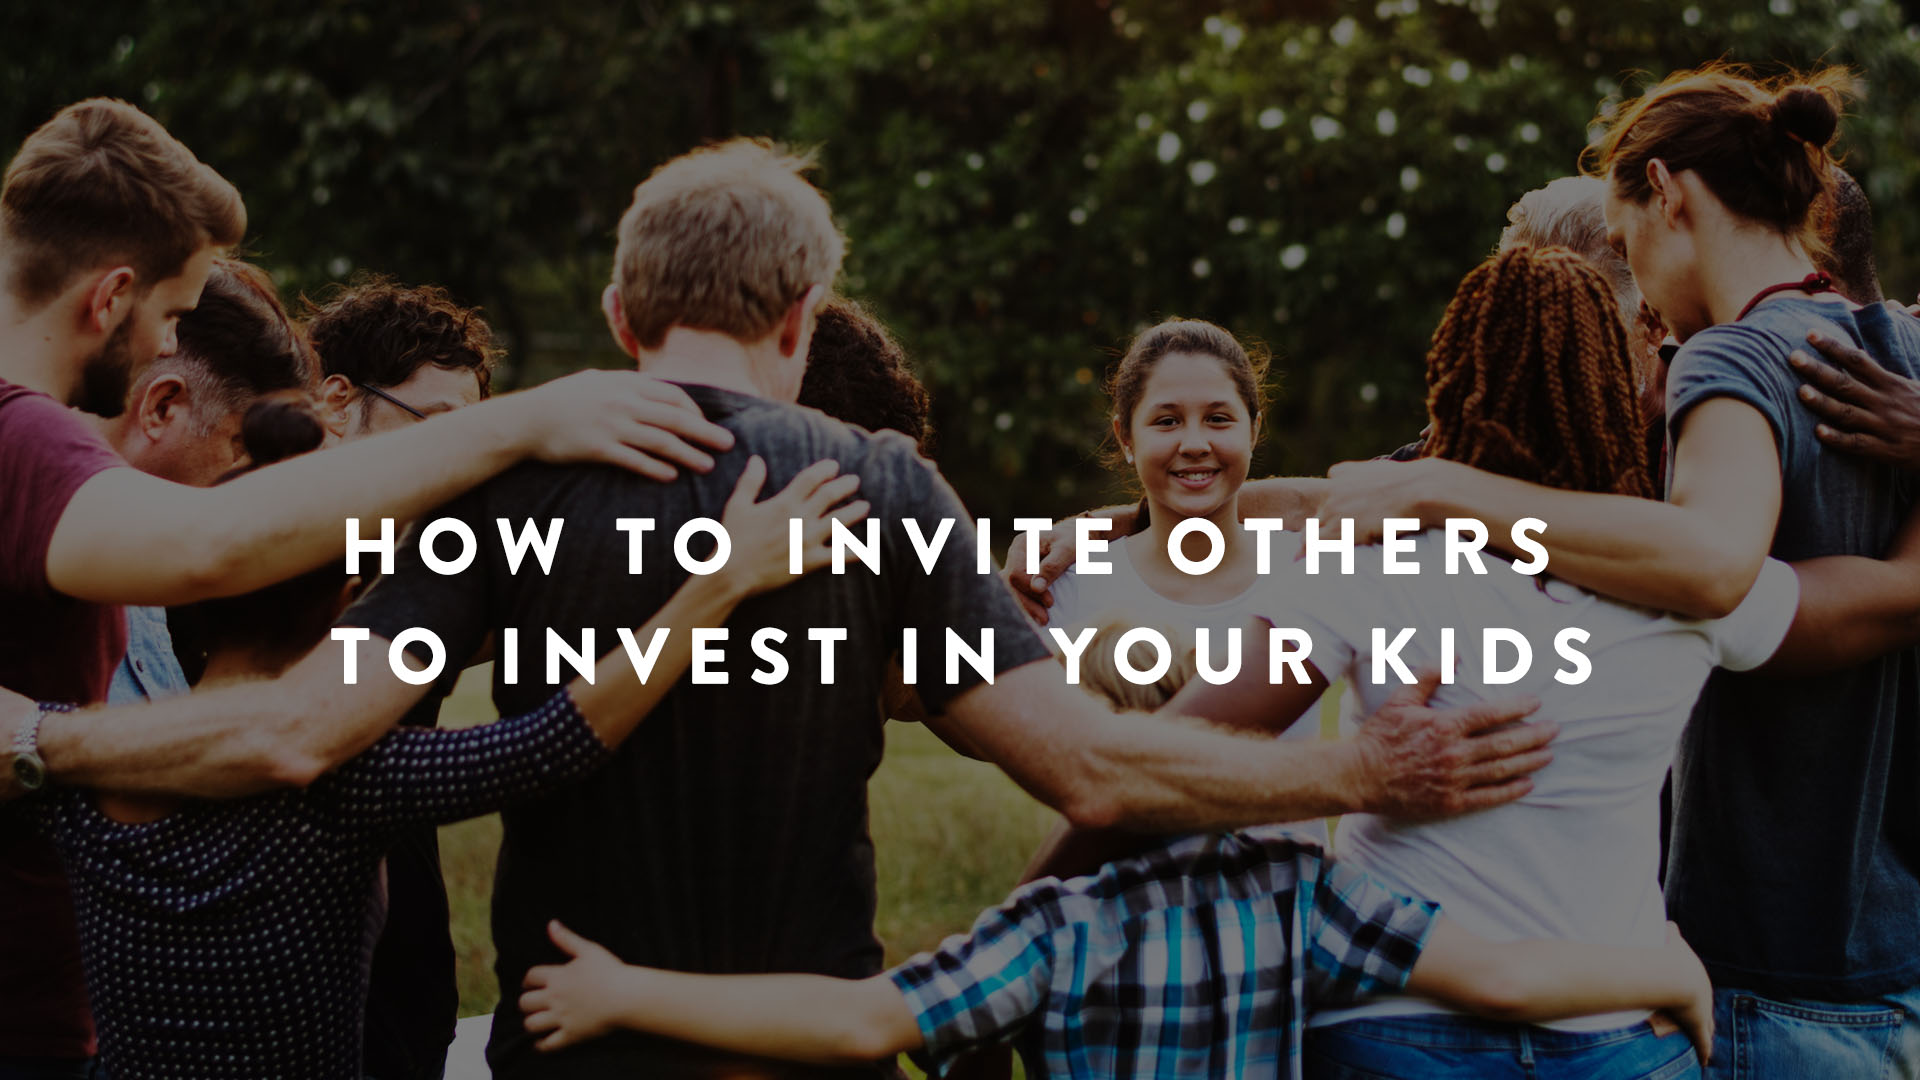 How to invite others to invest in your kids